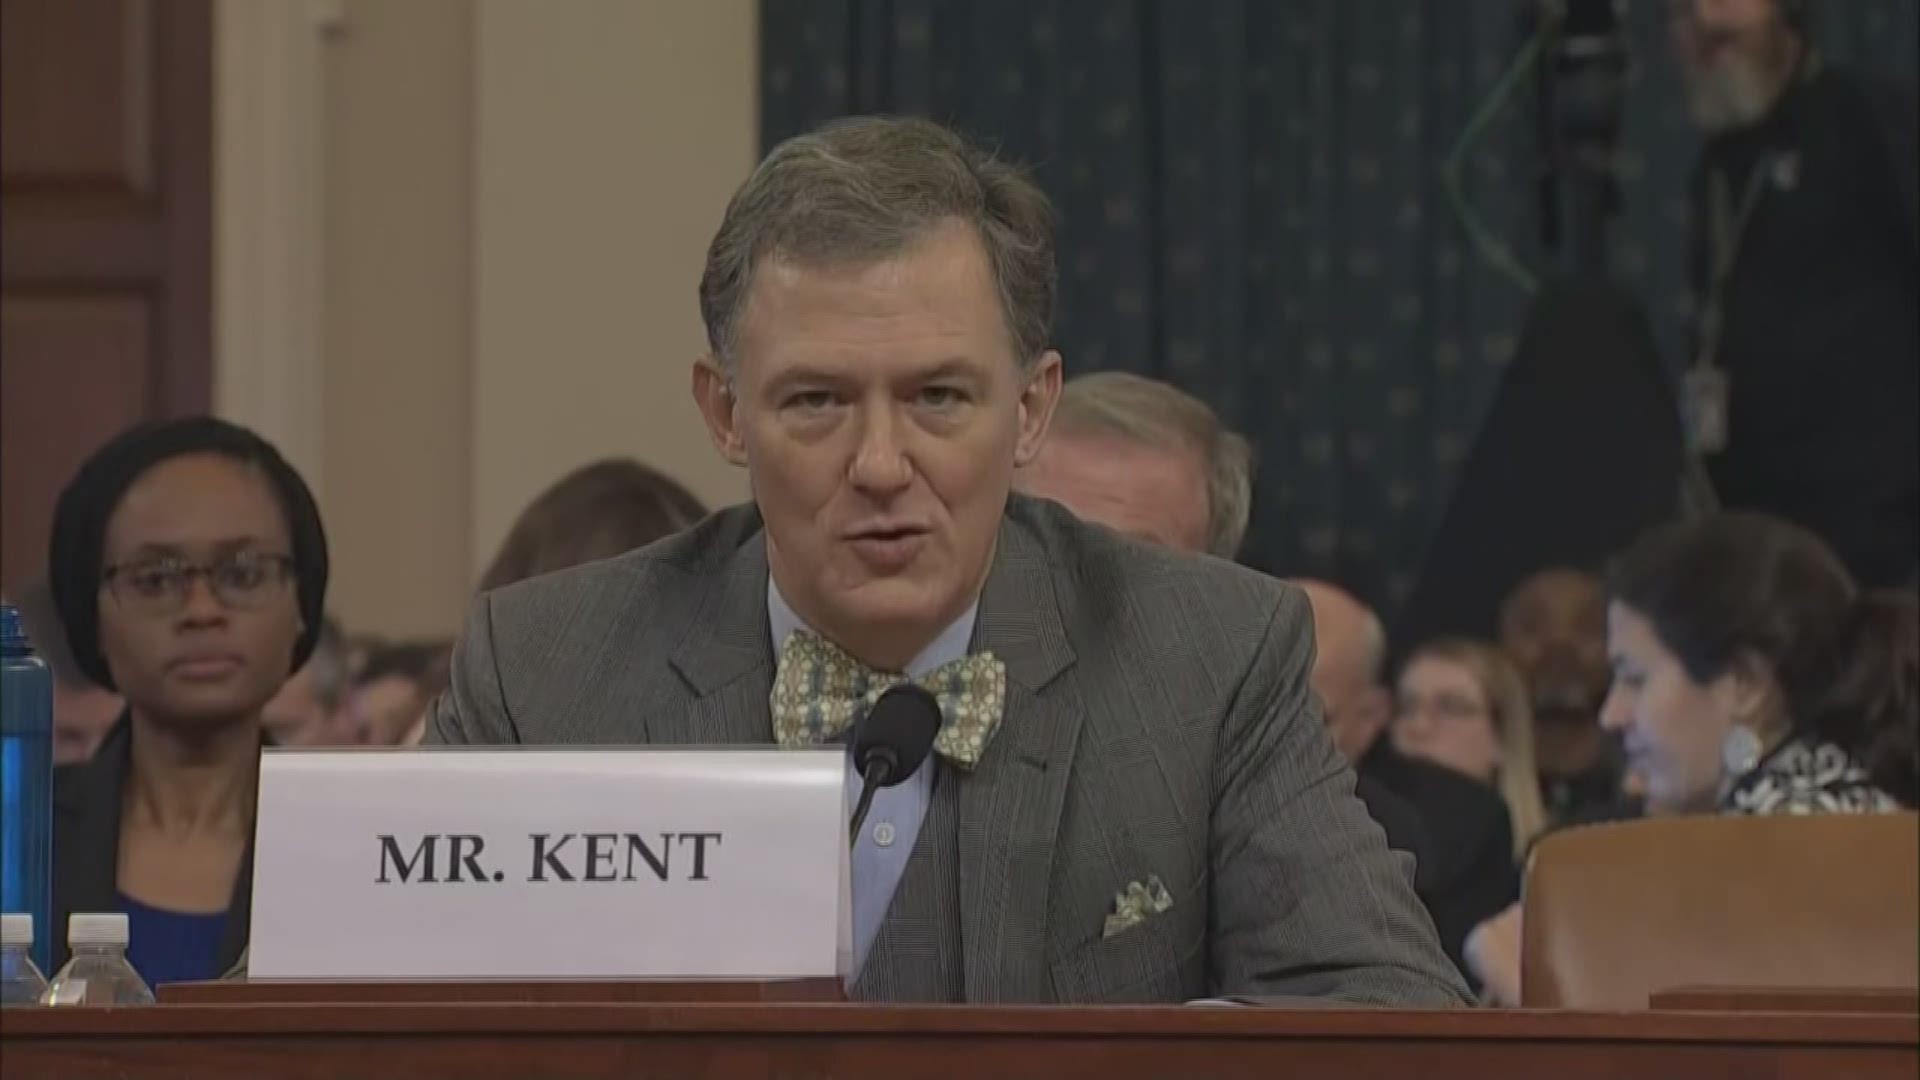 George Kent, a deputy assistant secretary of state, is testifying Wednesday in the first public hearing. He has already testified in a closed session.